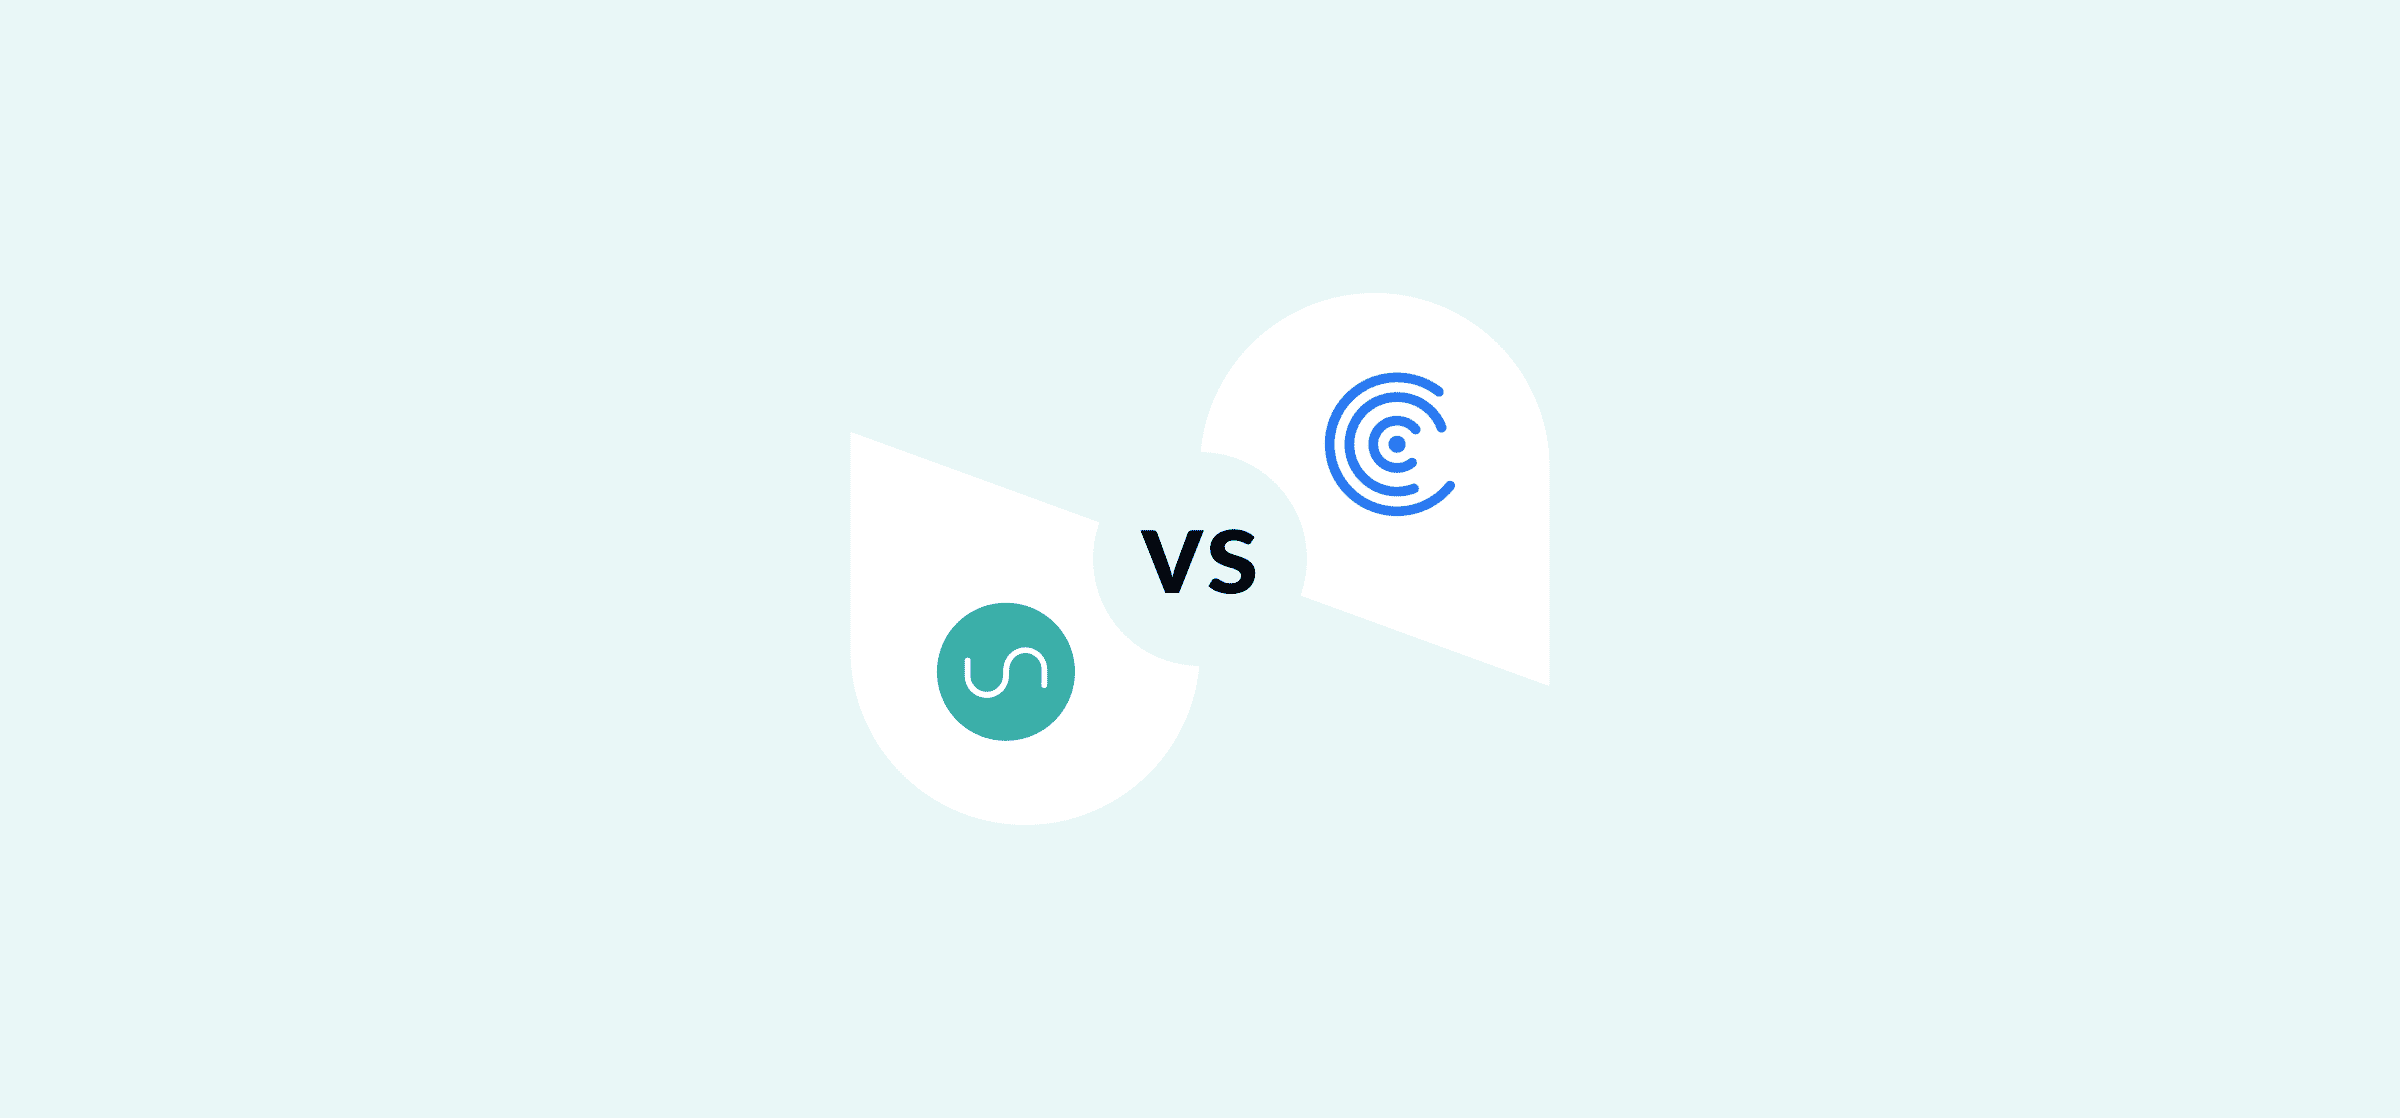 Logos for Unito and Coefficient, representing a blog post comparing the two.